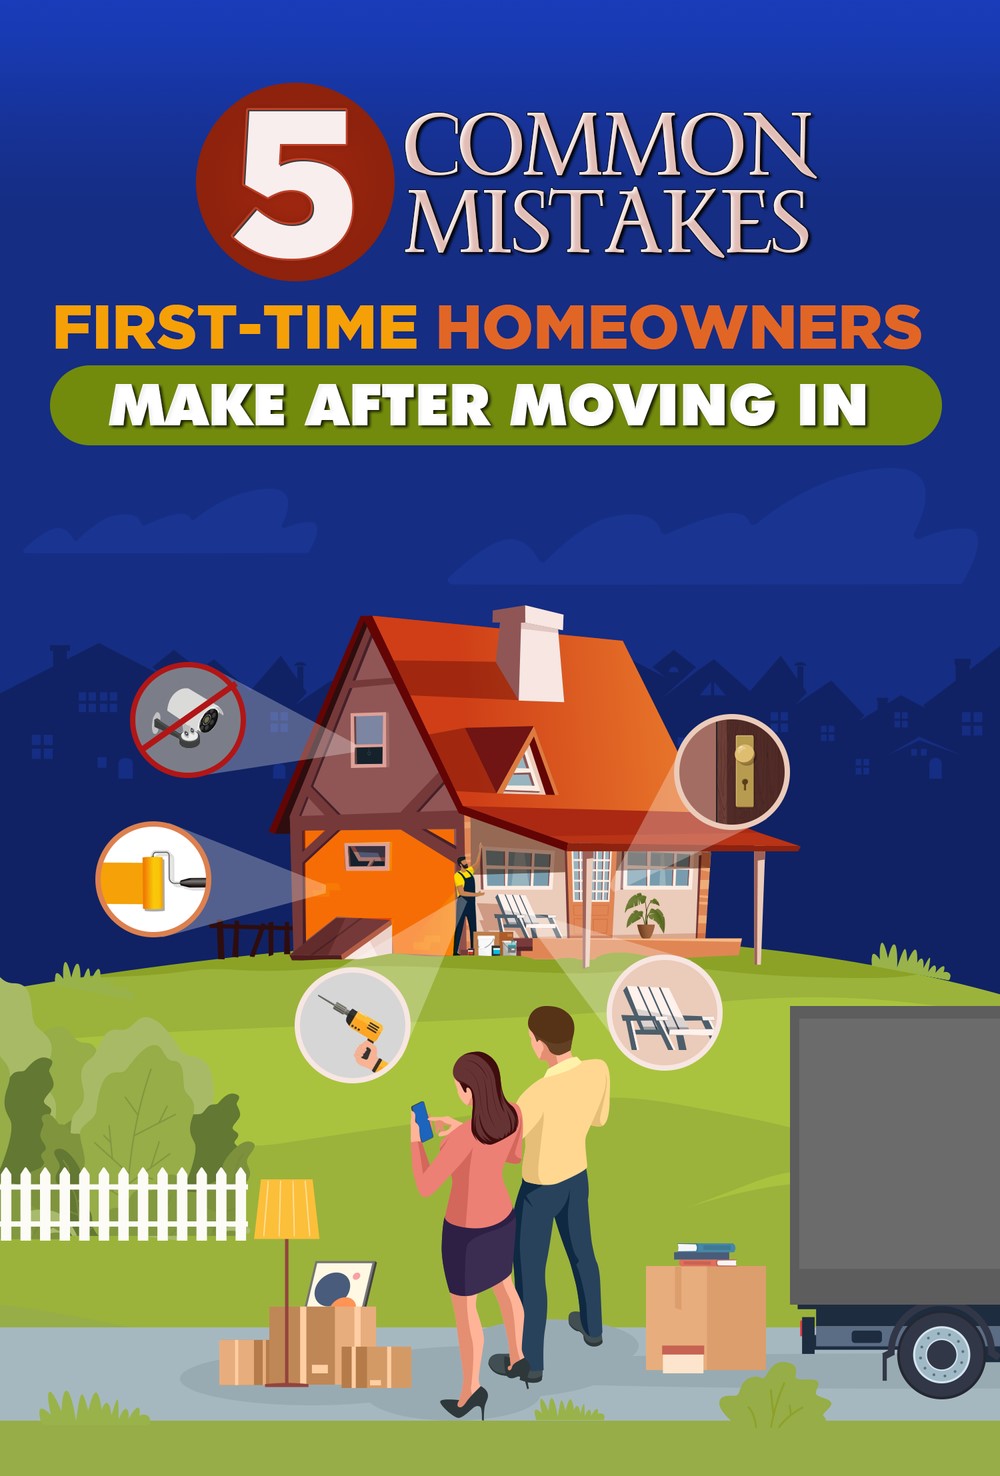 5 Common Mistakes First-Time Homeowners Make After Moving In